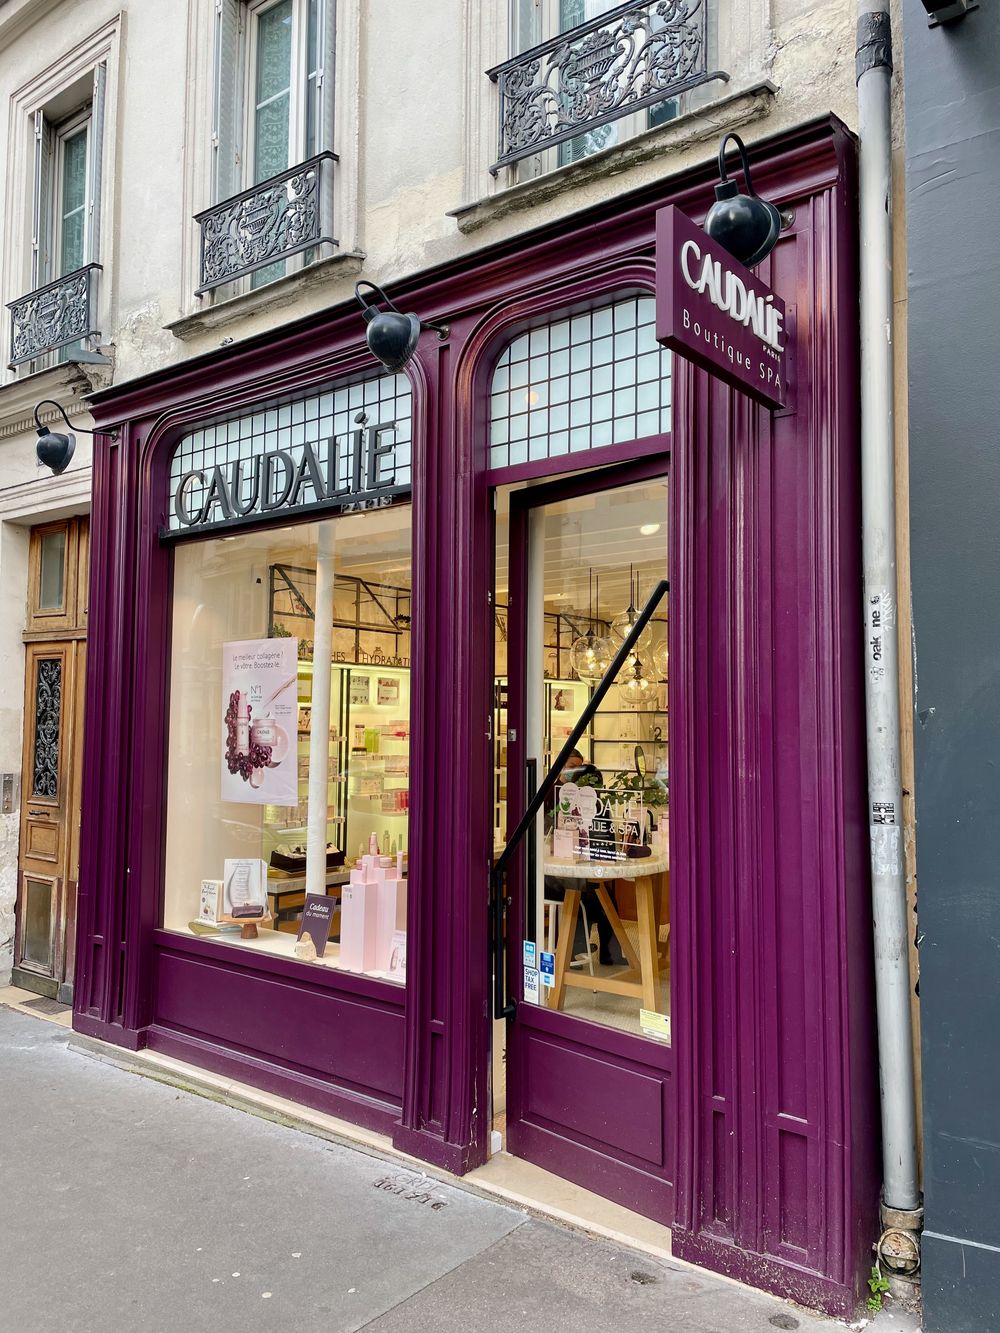 Caudalie Review: Is the ‘Clean’ French Brand Worth it?